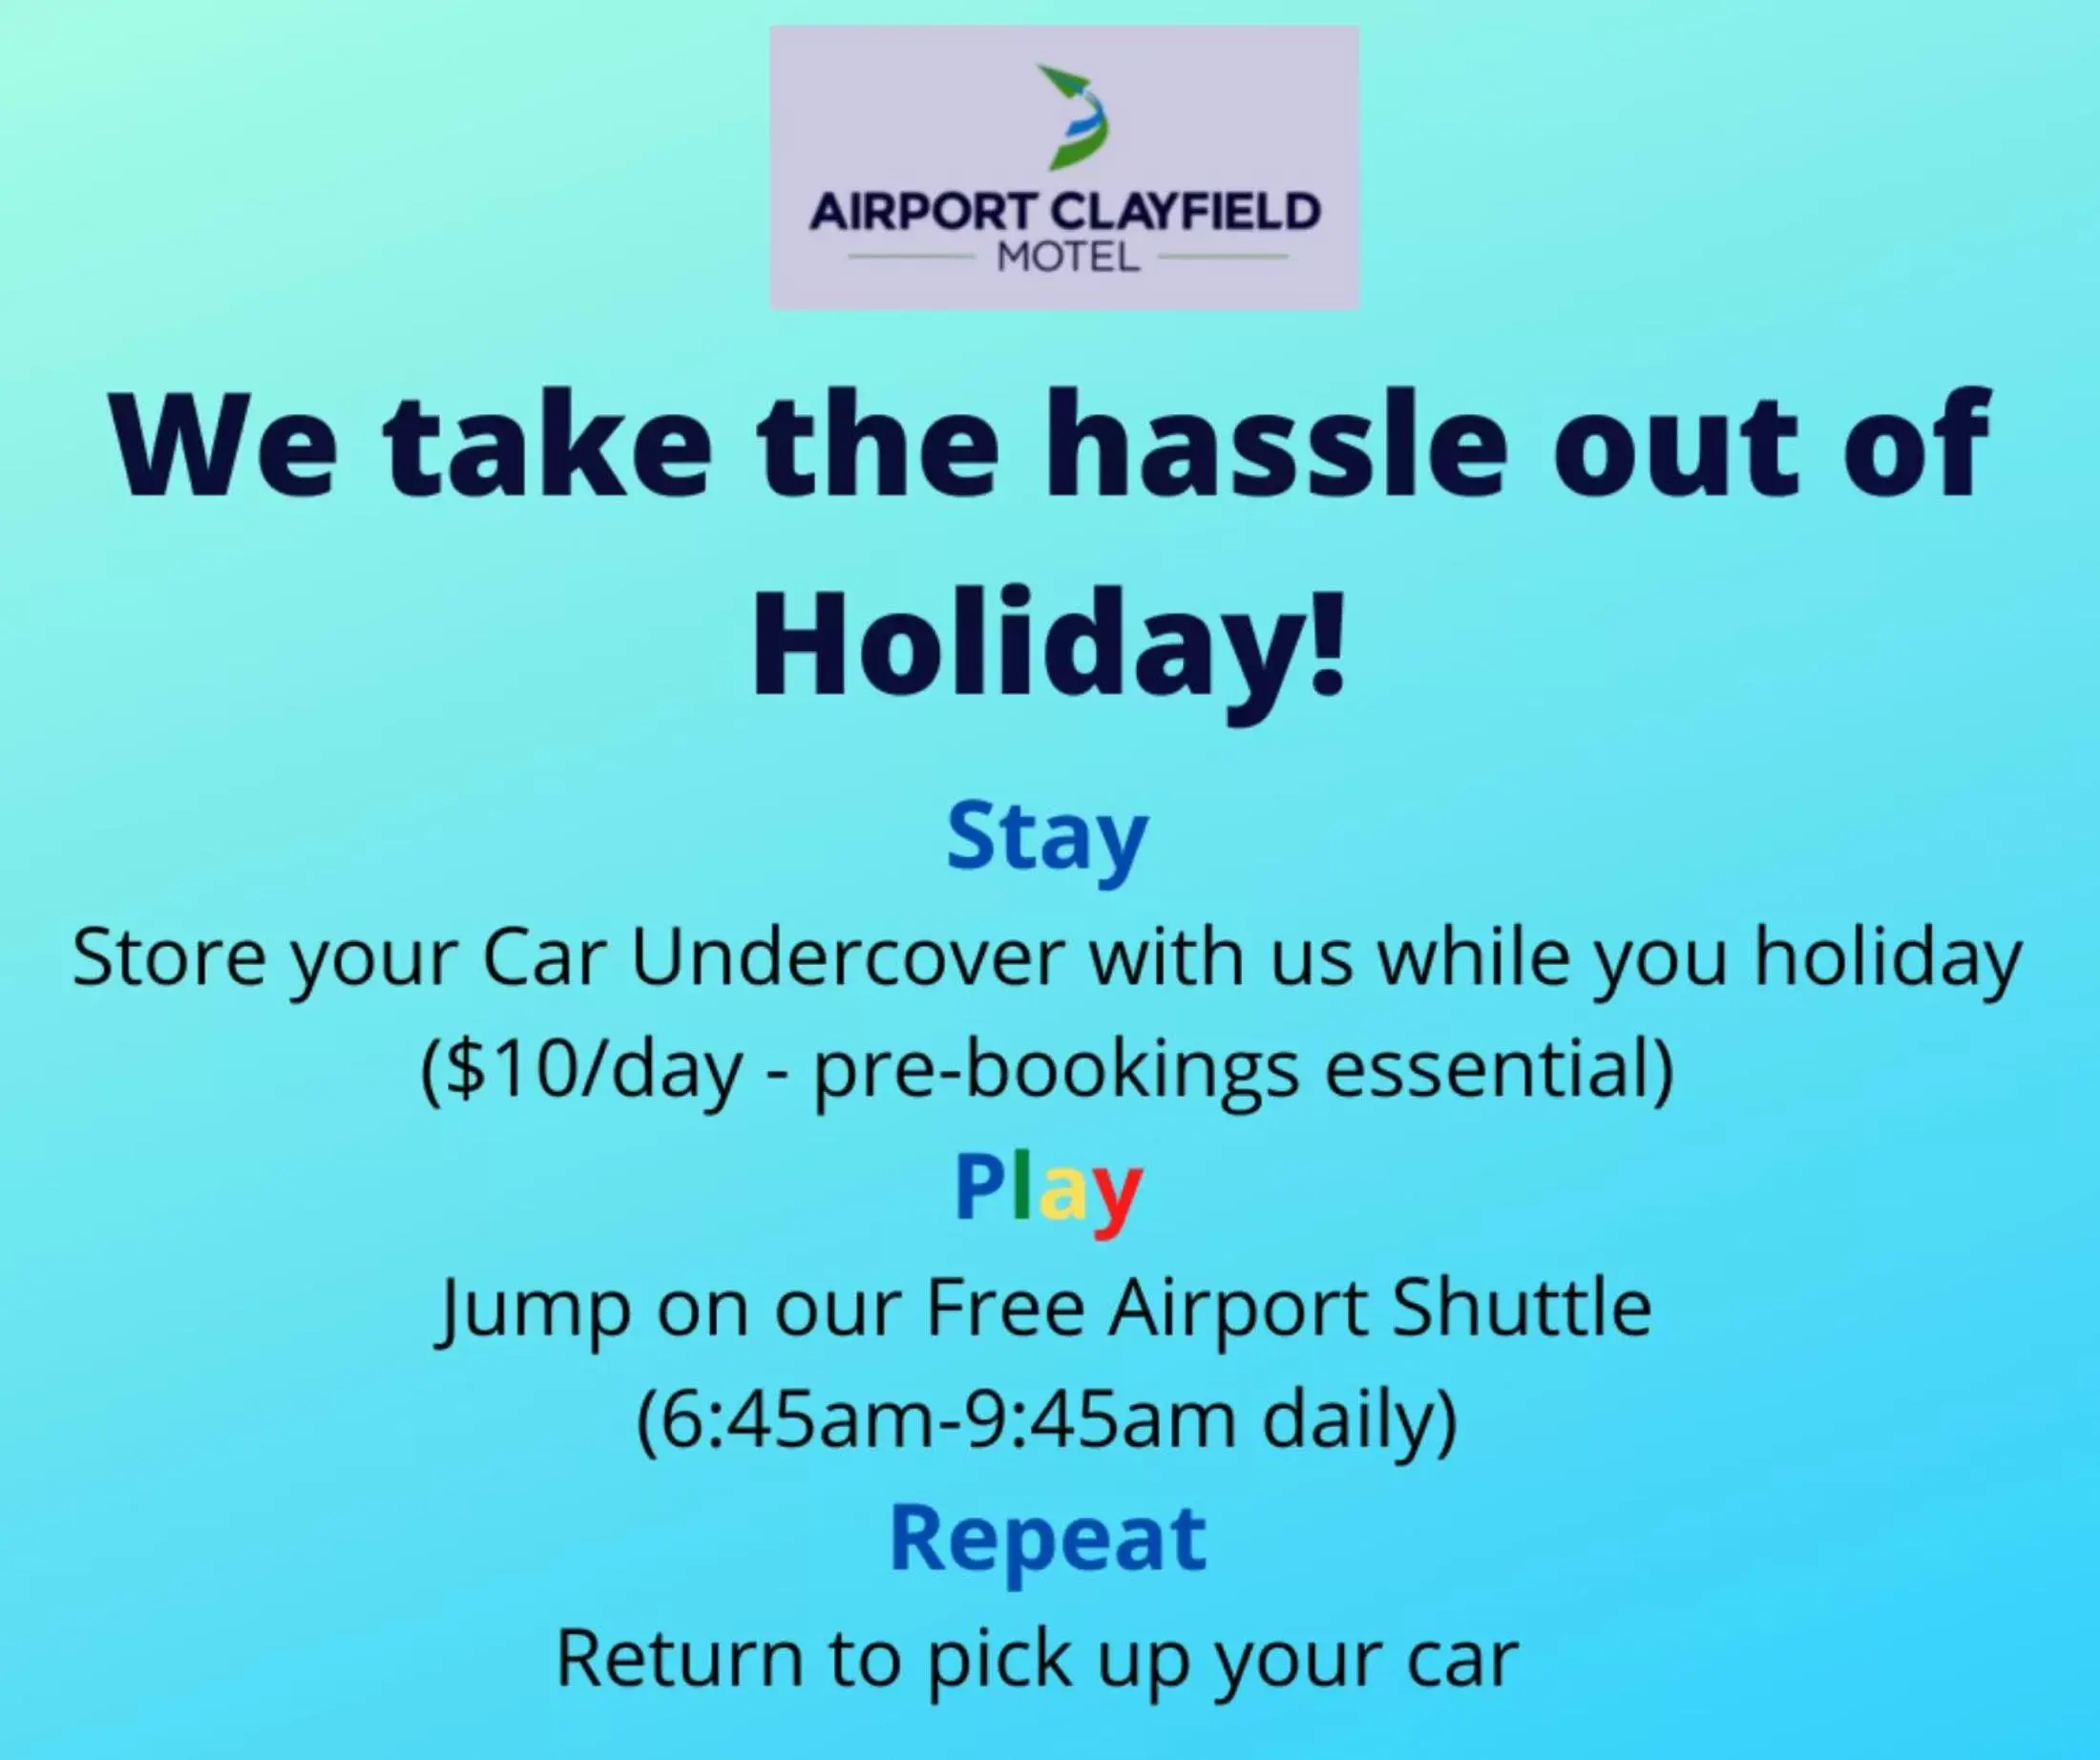 Parking in Airport Clayfield Motel